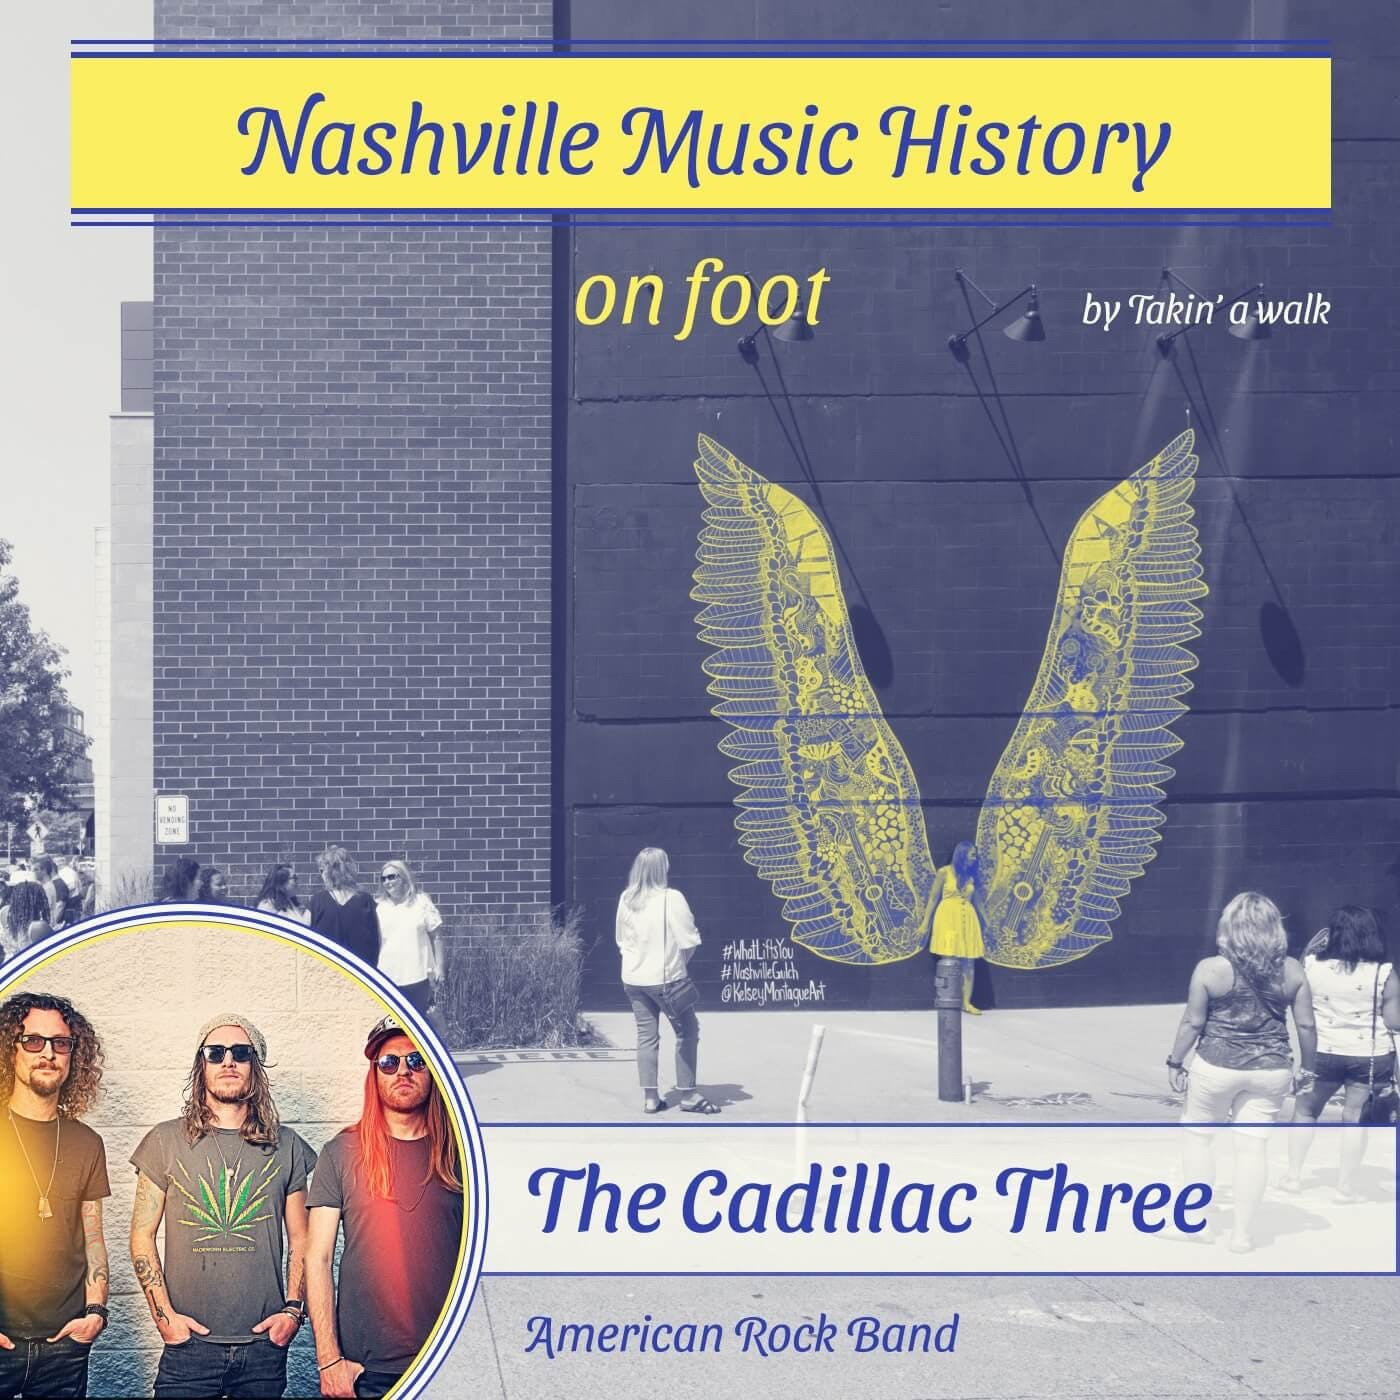 The Cadillac Three Band: Rock Music, Funk and Grunge and their unique Nashville sound